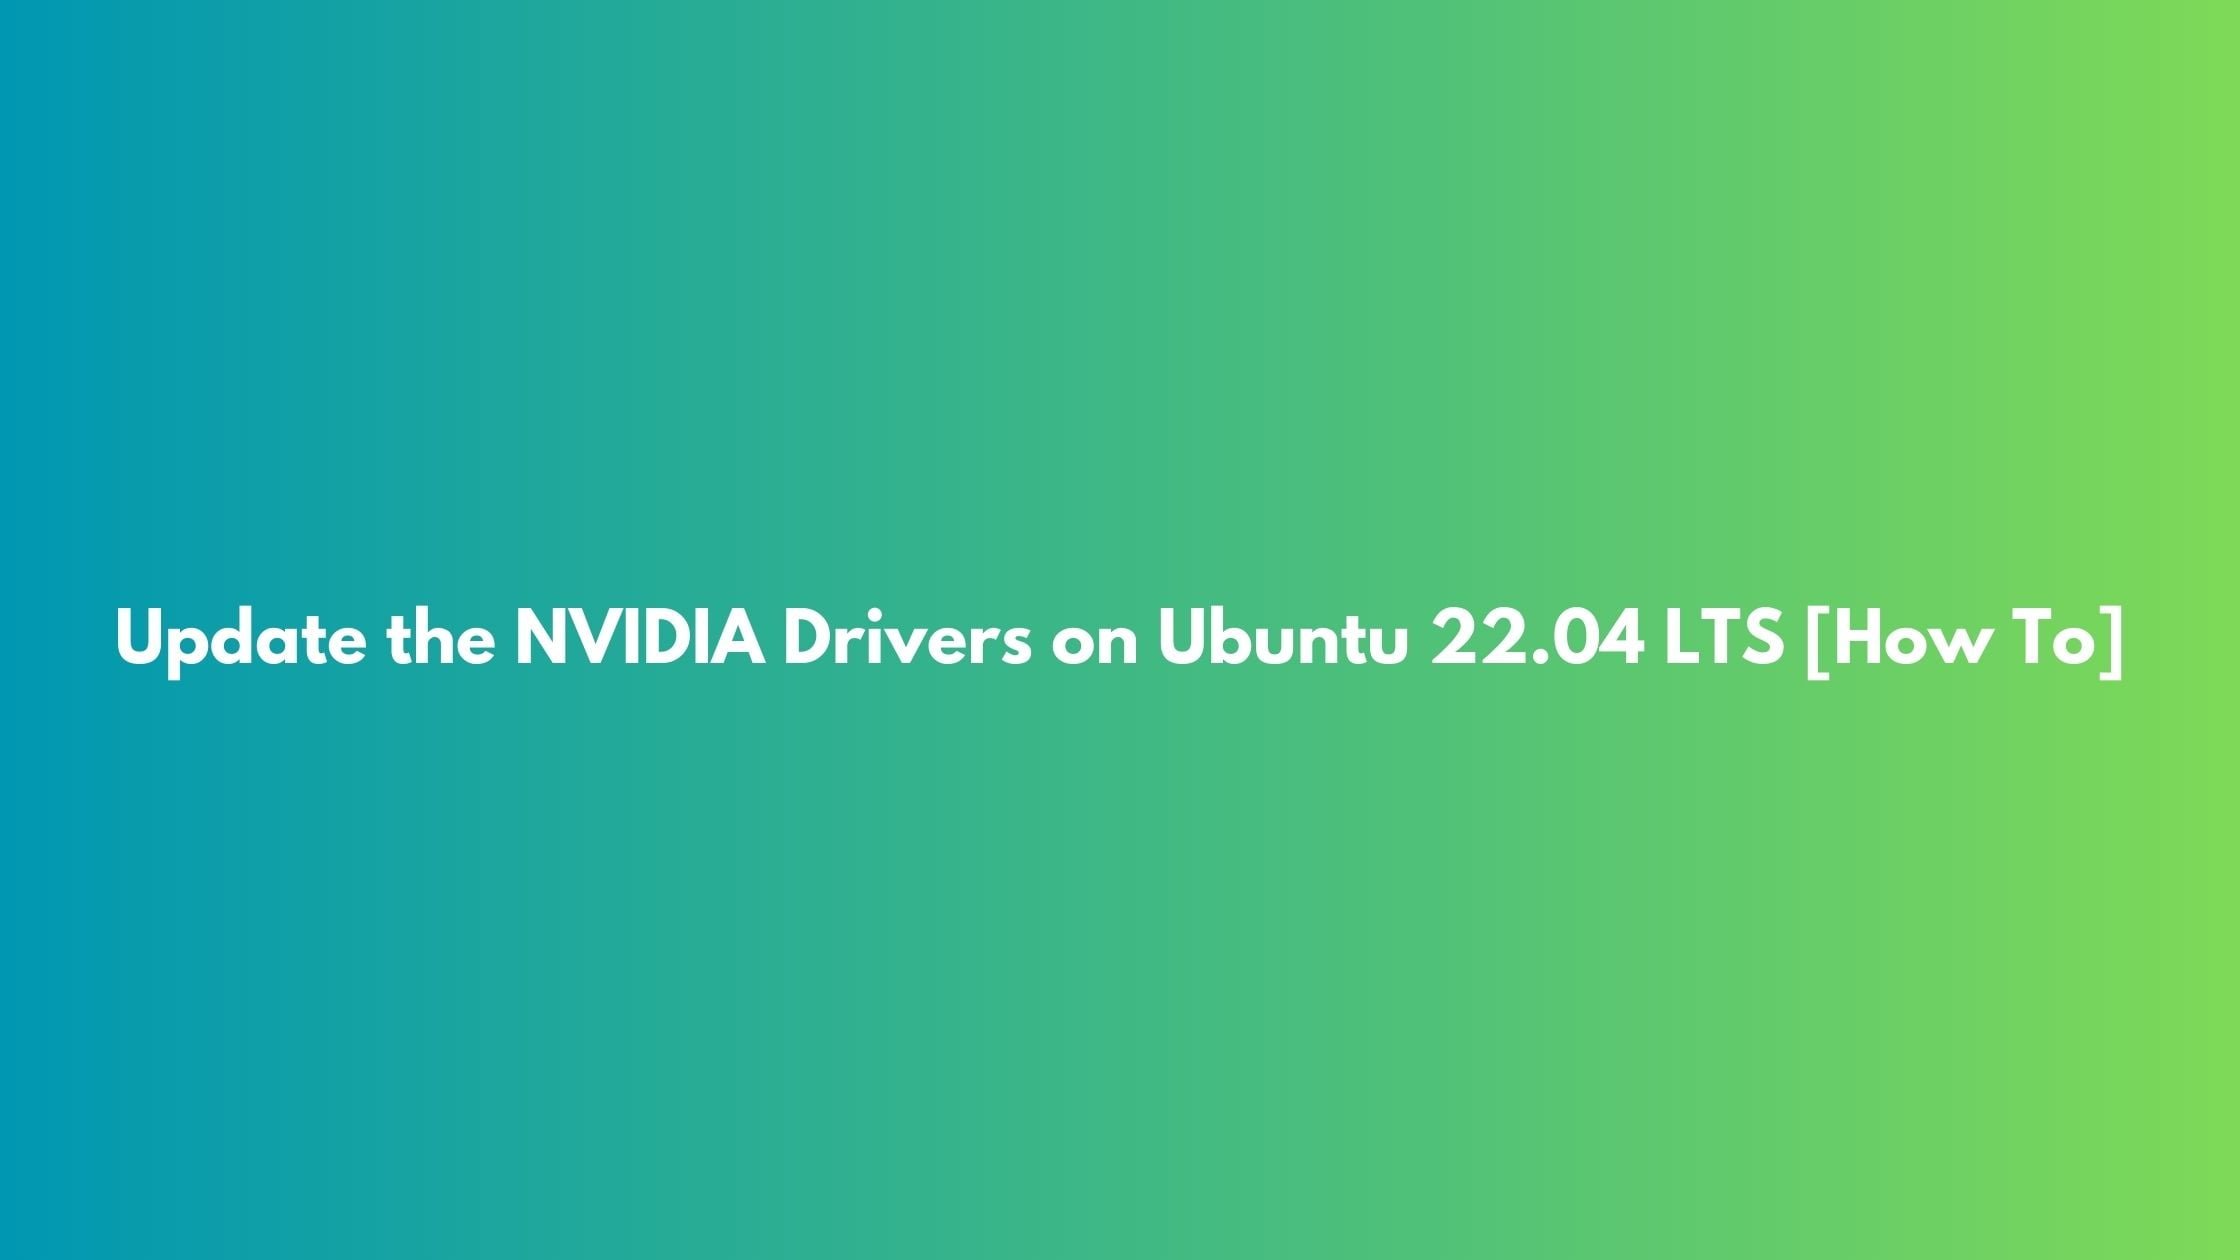 Update the NVIDIA Drivers on Ubuntu 22.04 LTS [How To]